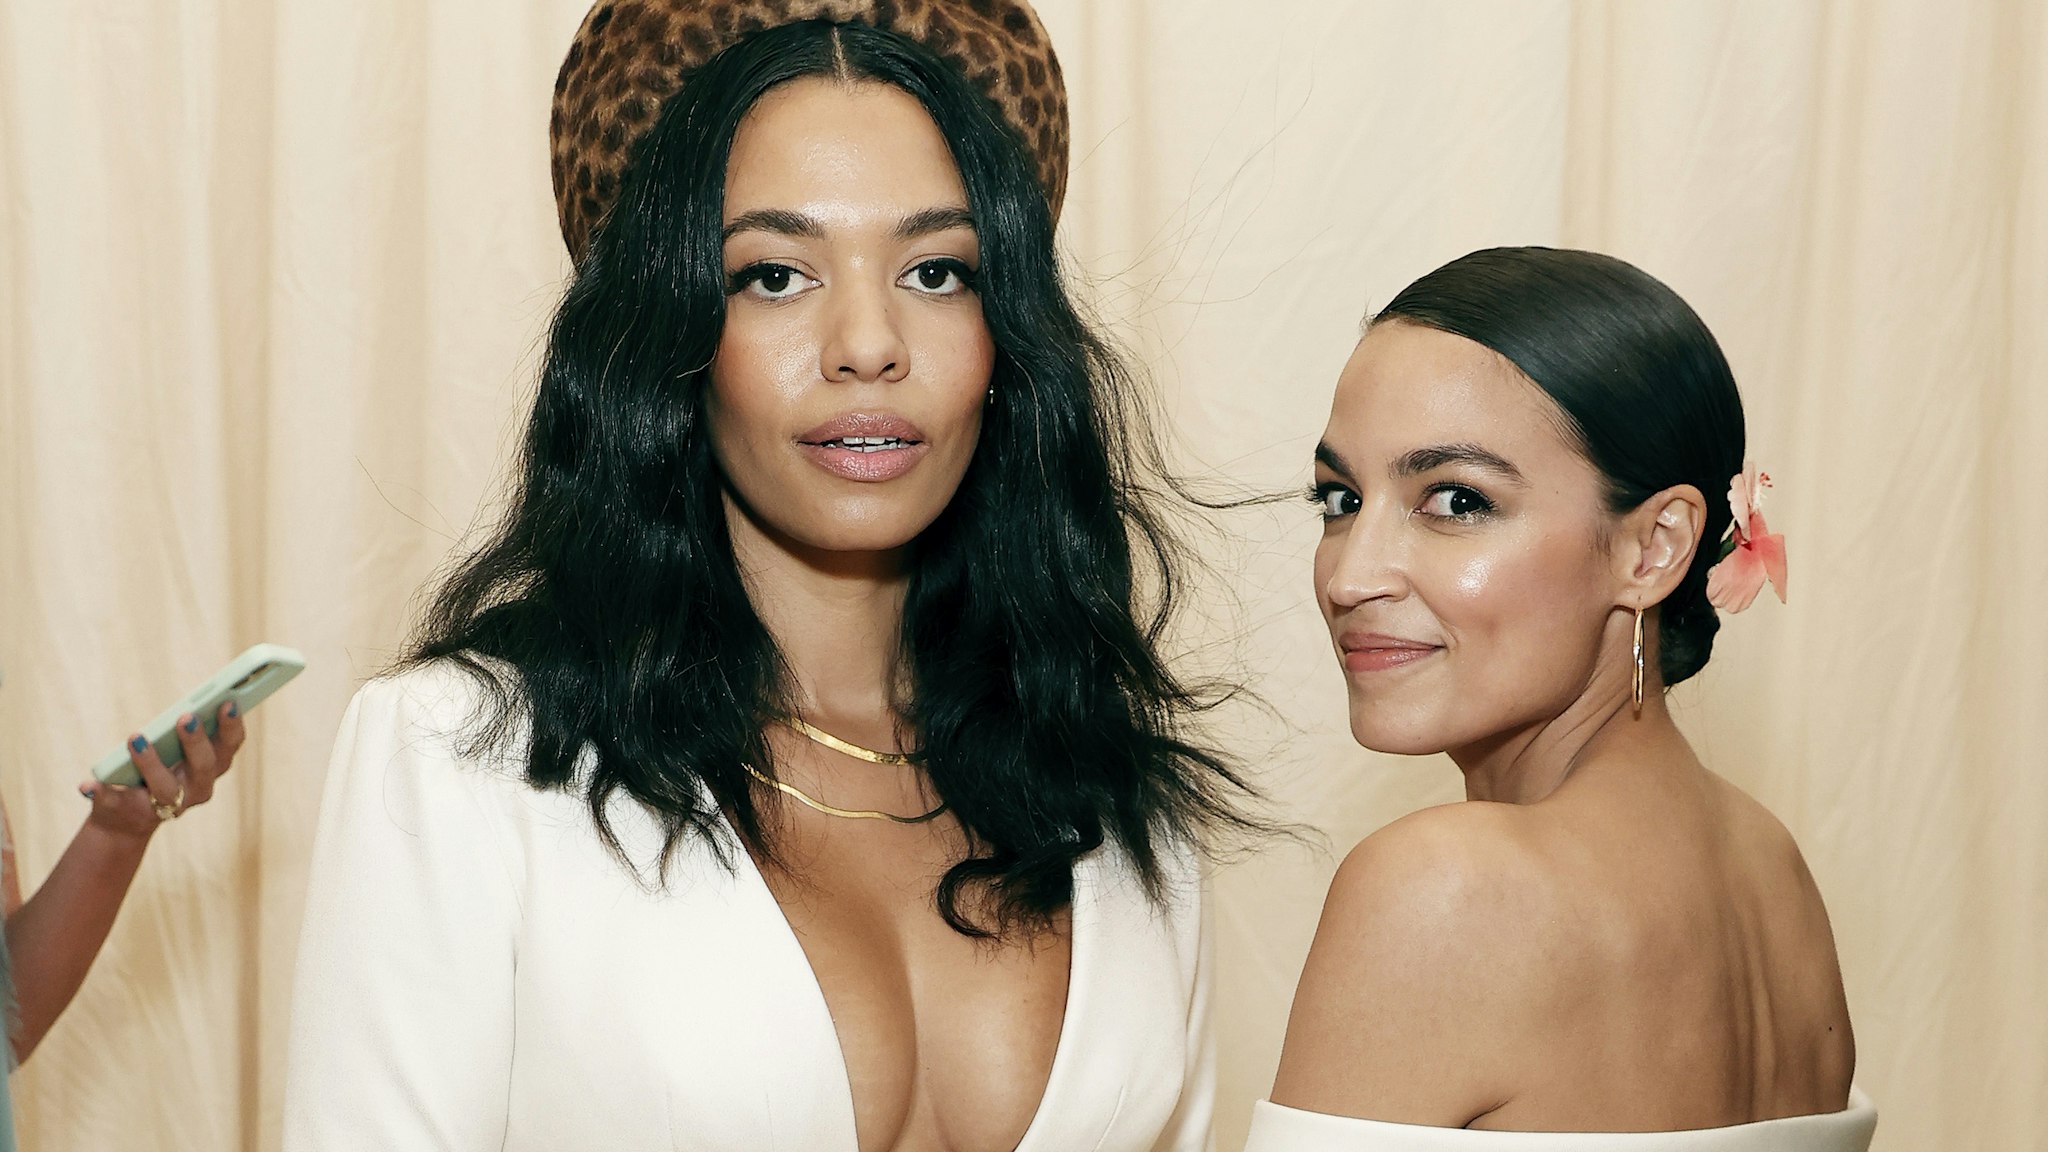 NEW YORK, NEW YORK - SEPTEMBER 13: Aurora James and Alexandria Ocasio-Cortez attend The 2021 Met Gala Celebrating In America: A Lexicon Of Fashion at Metropolitan Museum of Art on September 13, 2021 in New York City.